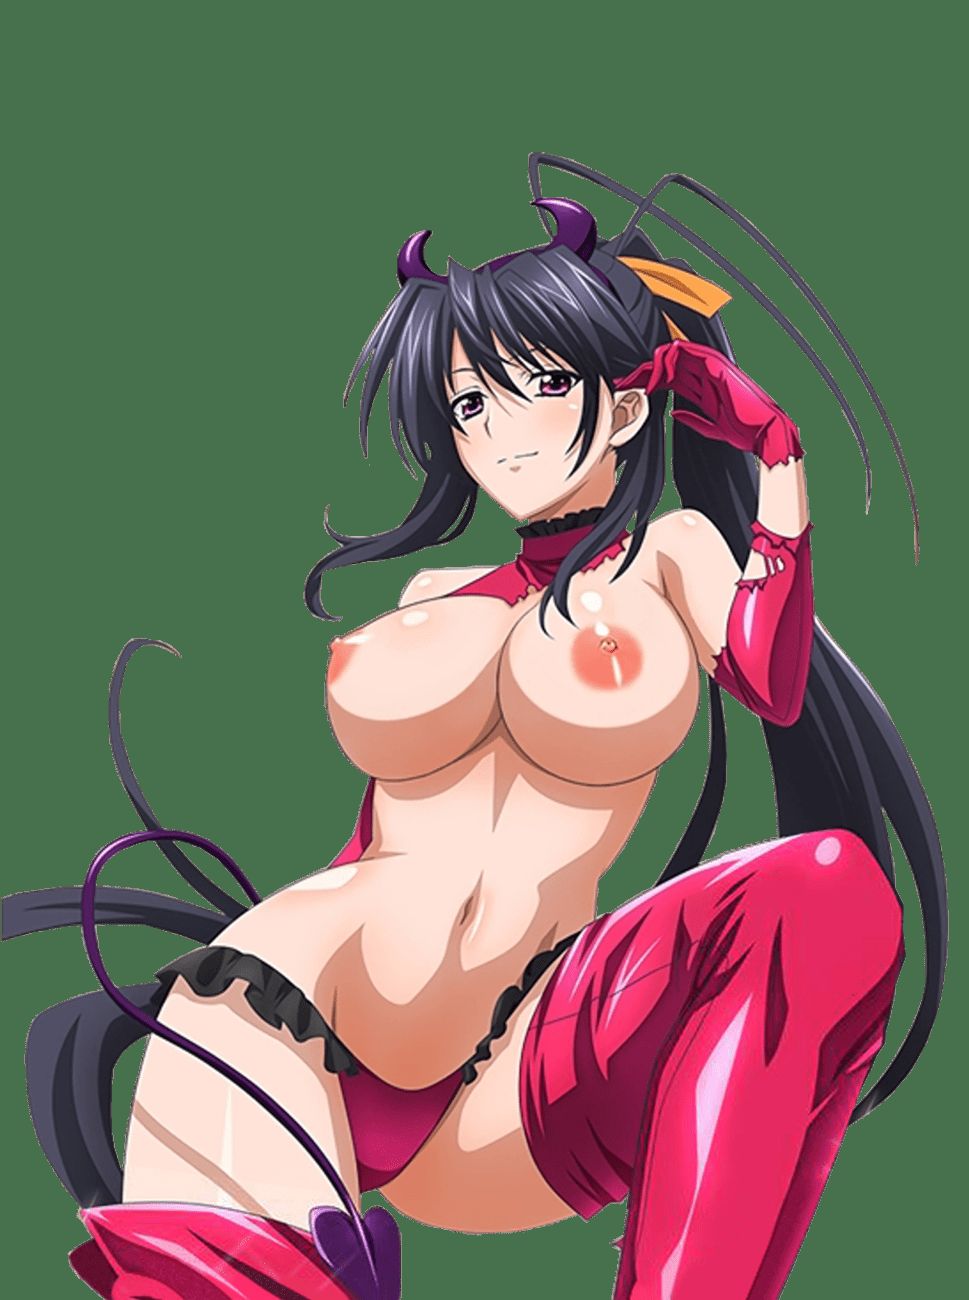 [Anime character material] png background of animated characters erotic images that 118 8